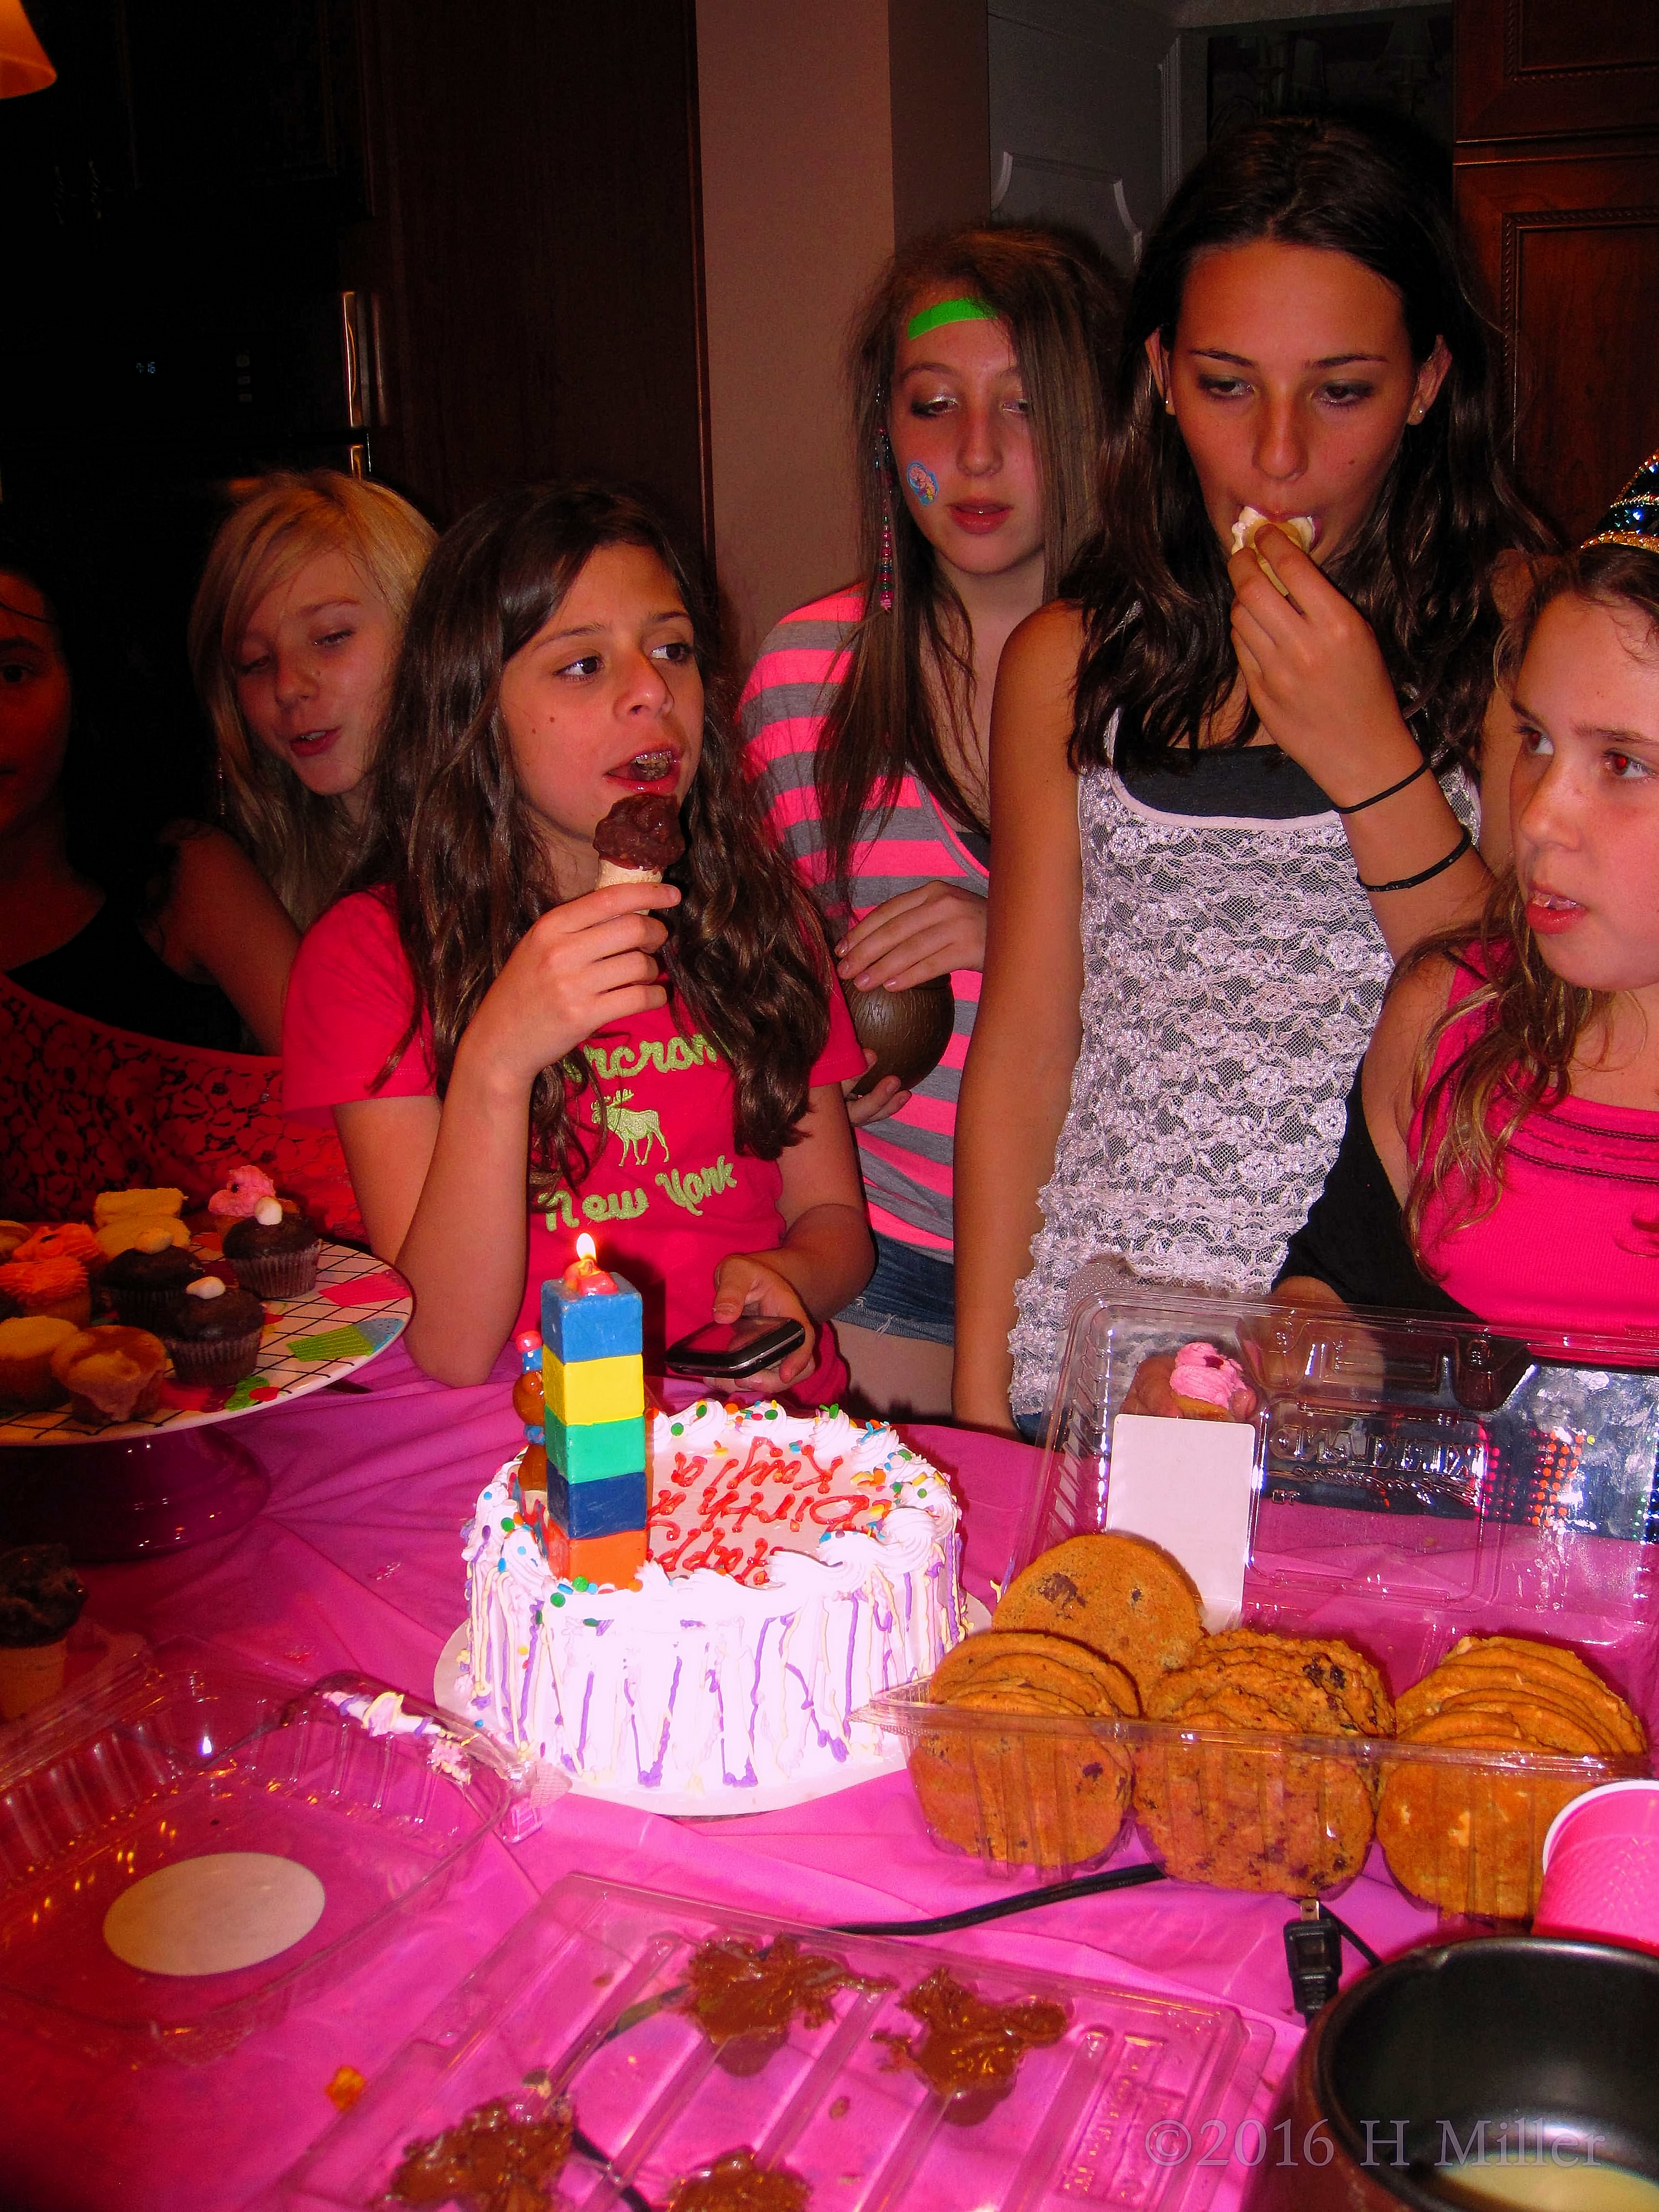 Friends And Sweet Treats Make The Girls Spa Party More Fun! 